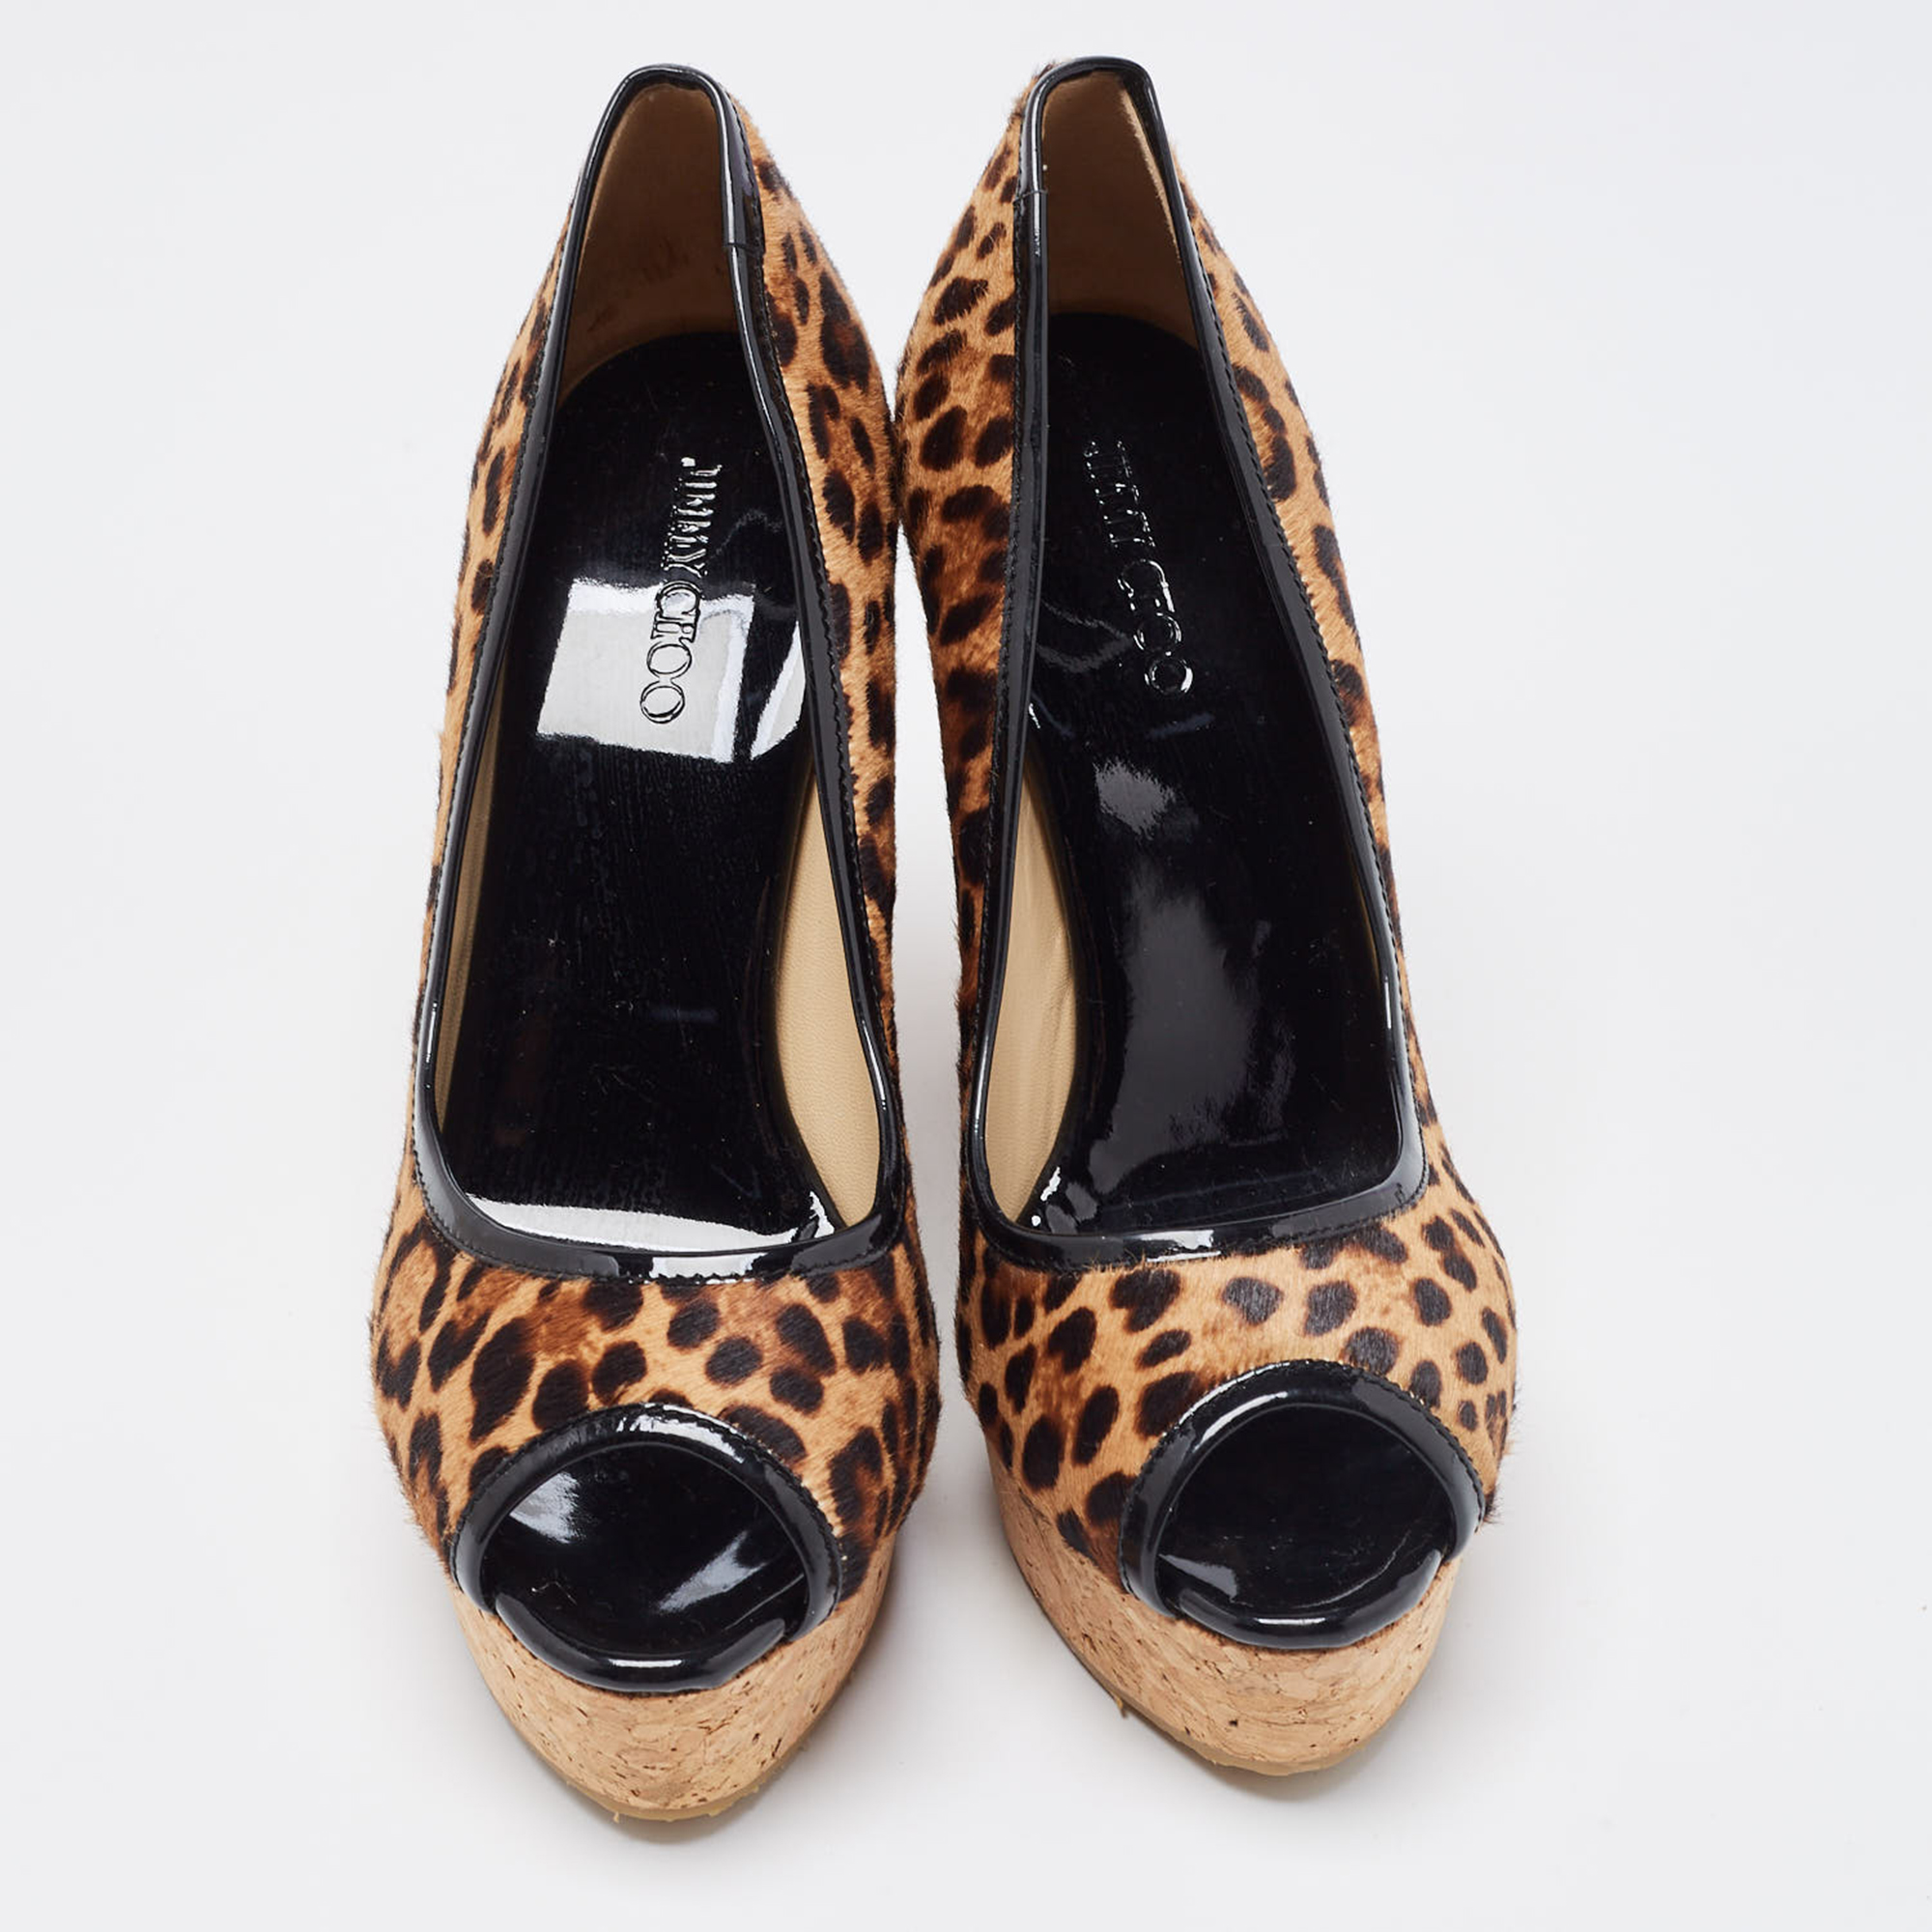 Jimmy Choo Brown/Beige Leopard Print Calf Hair And Patent Leather Papina Trim Cork Wedge Platform Pumps Size 39